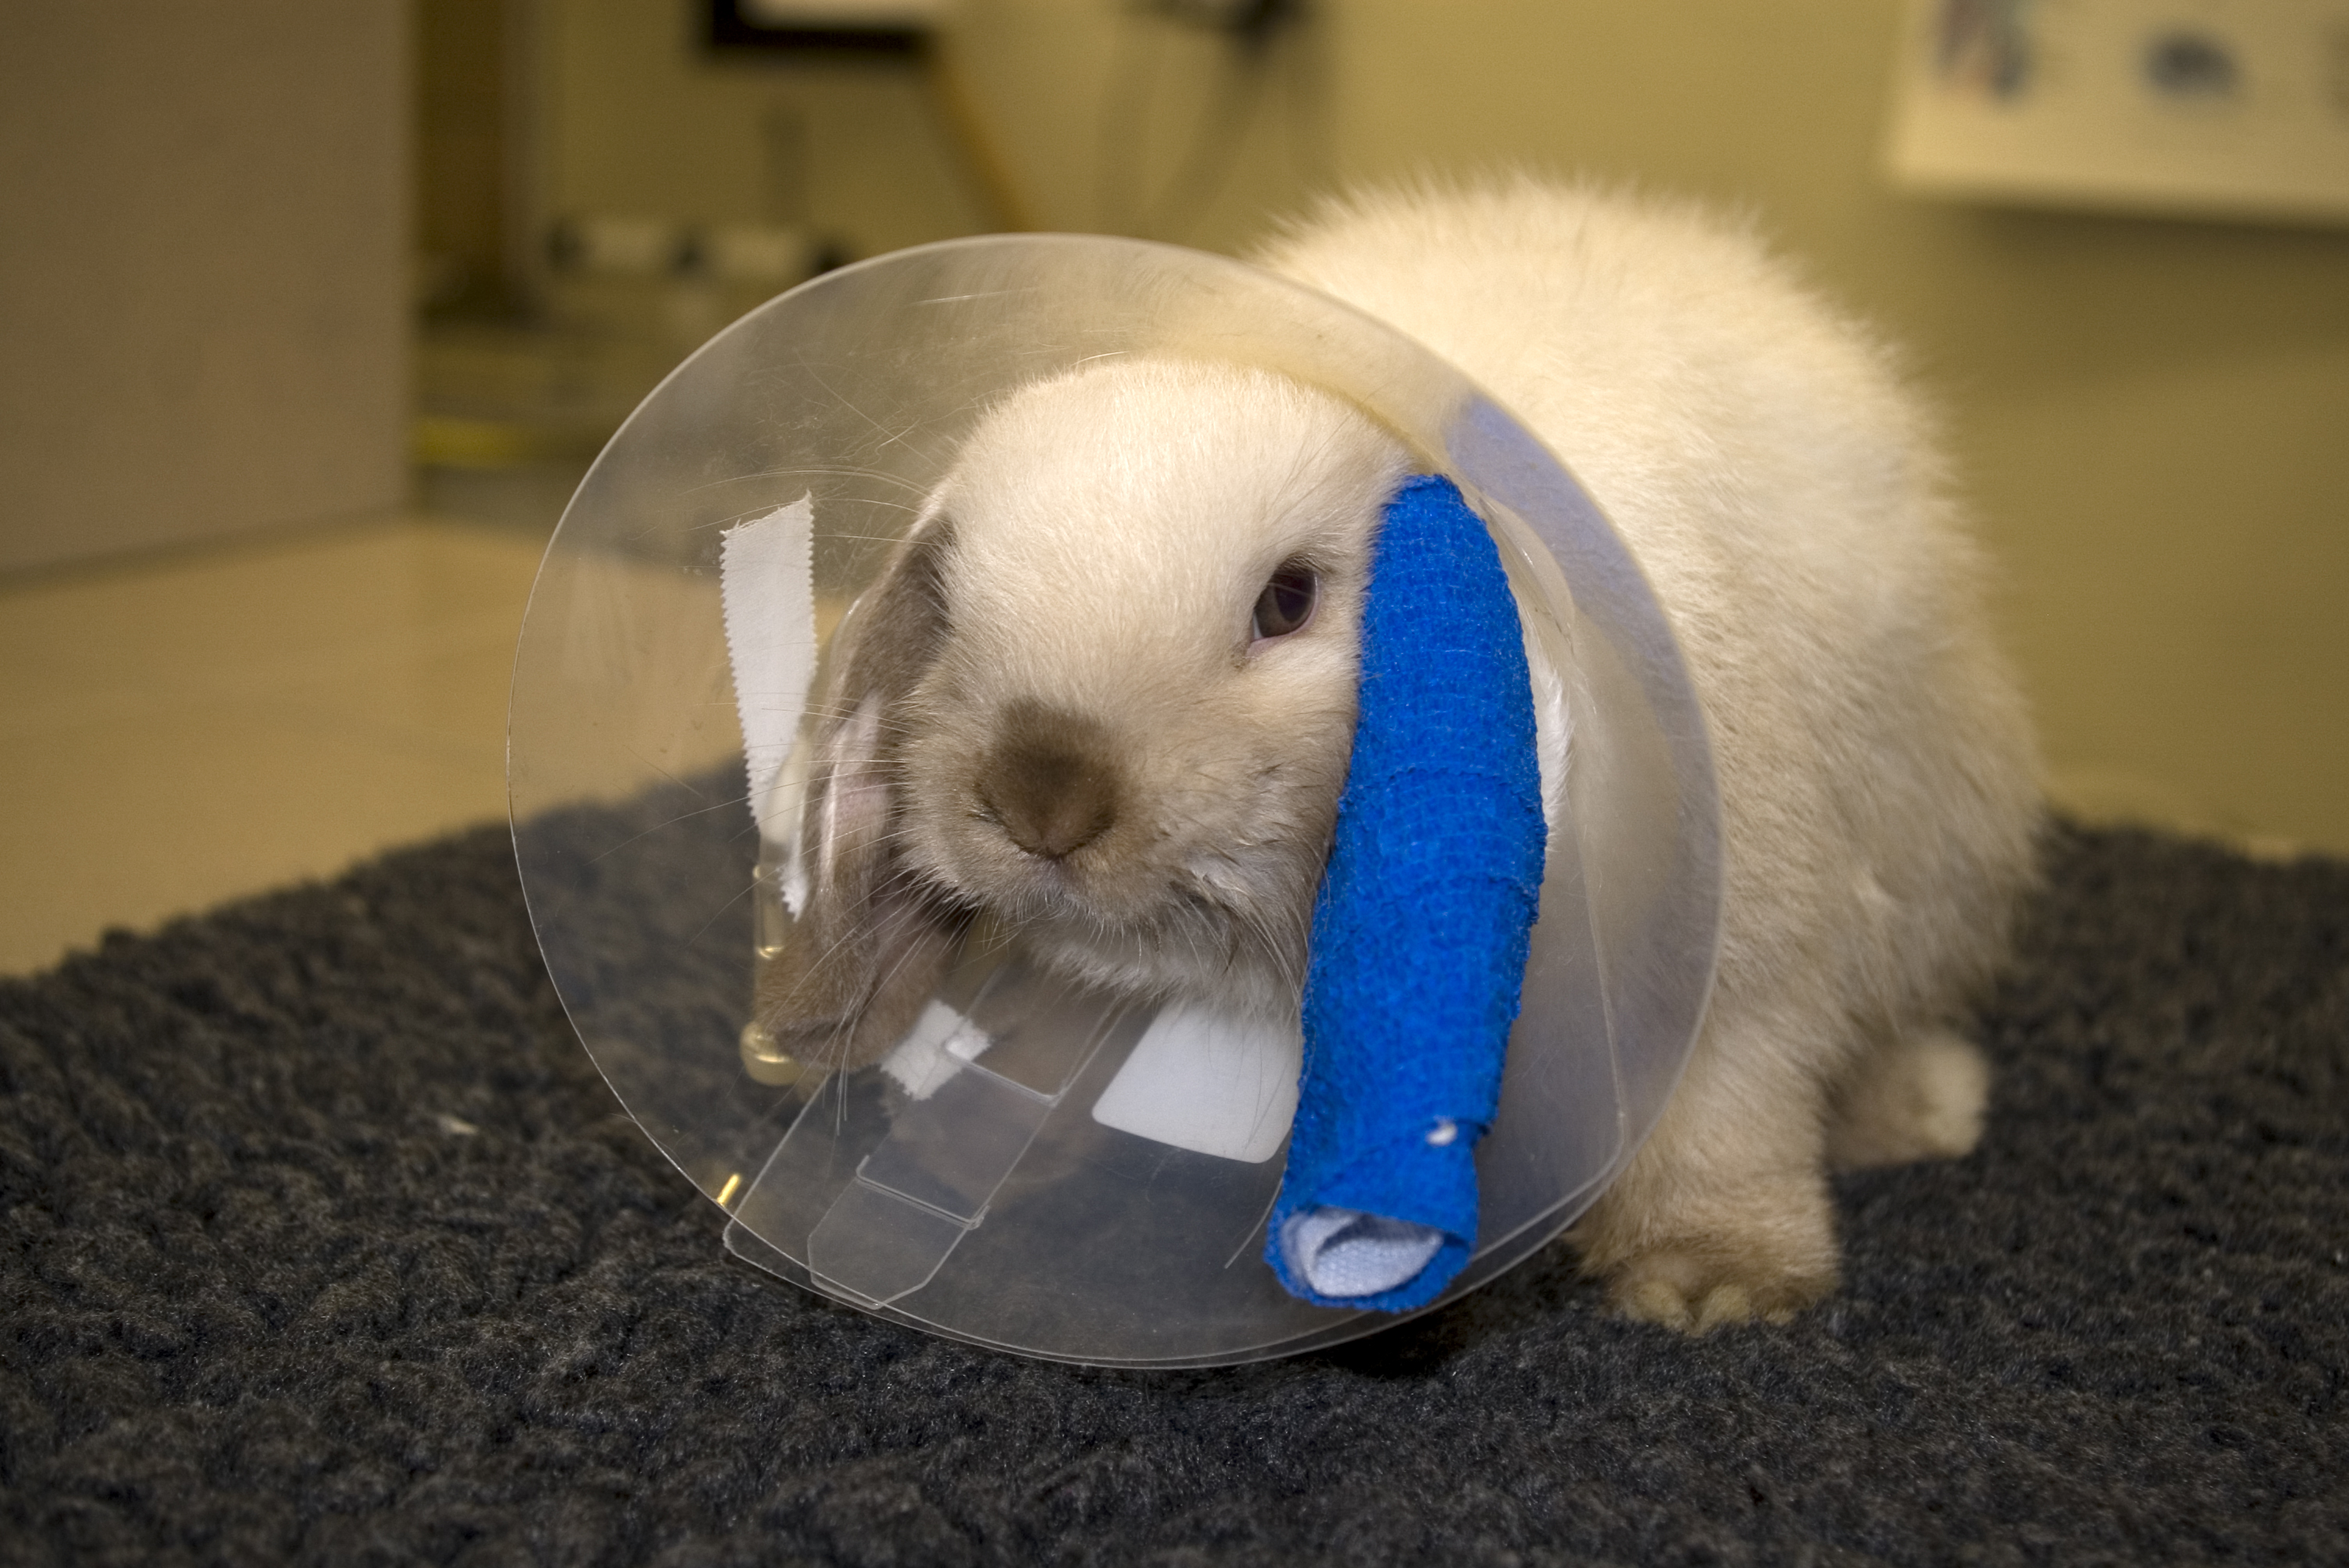 Rabbit with collar and intravenous drip